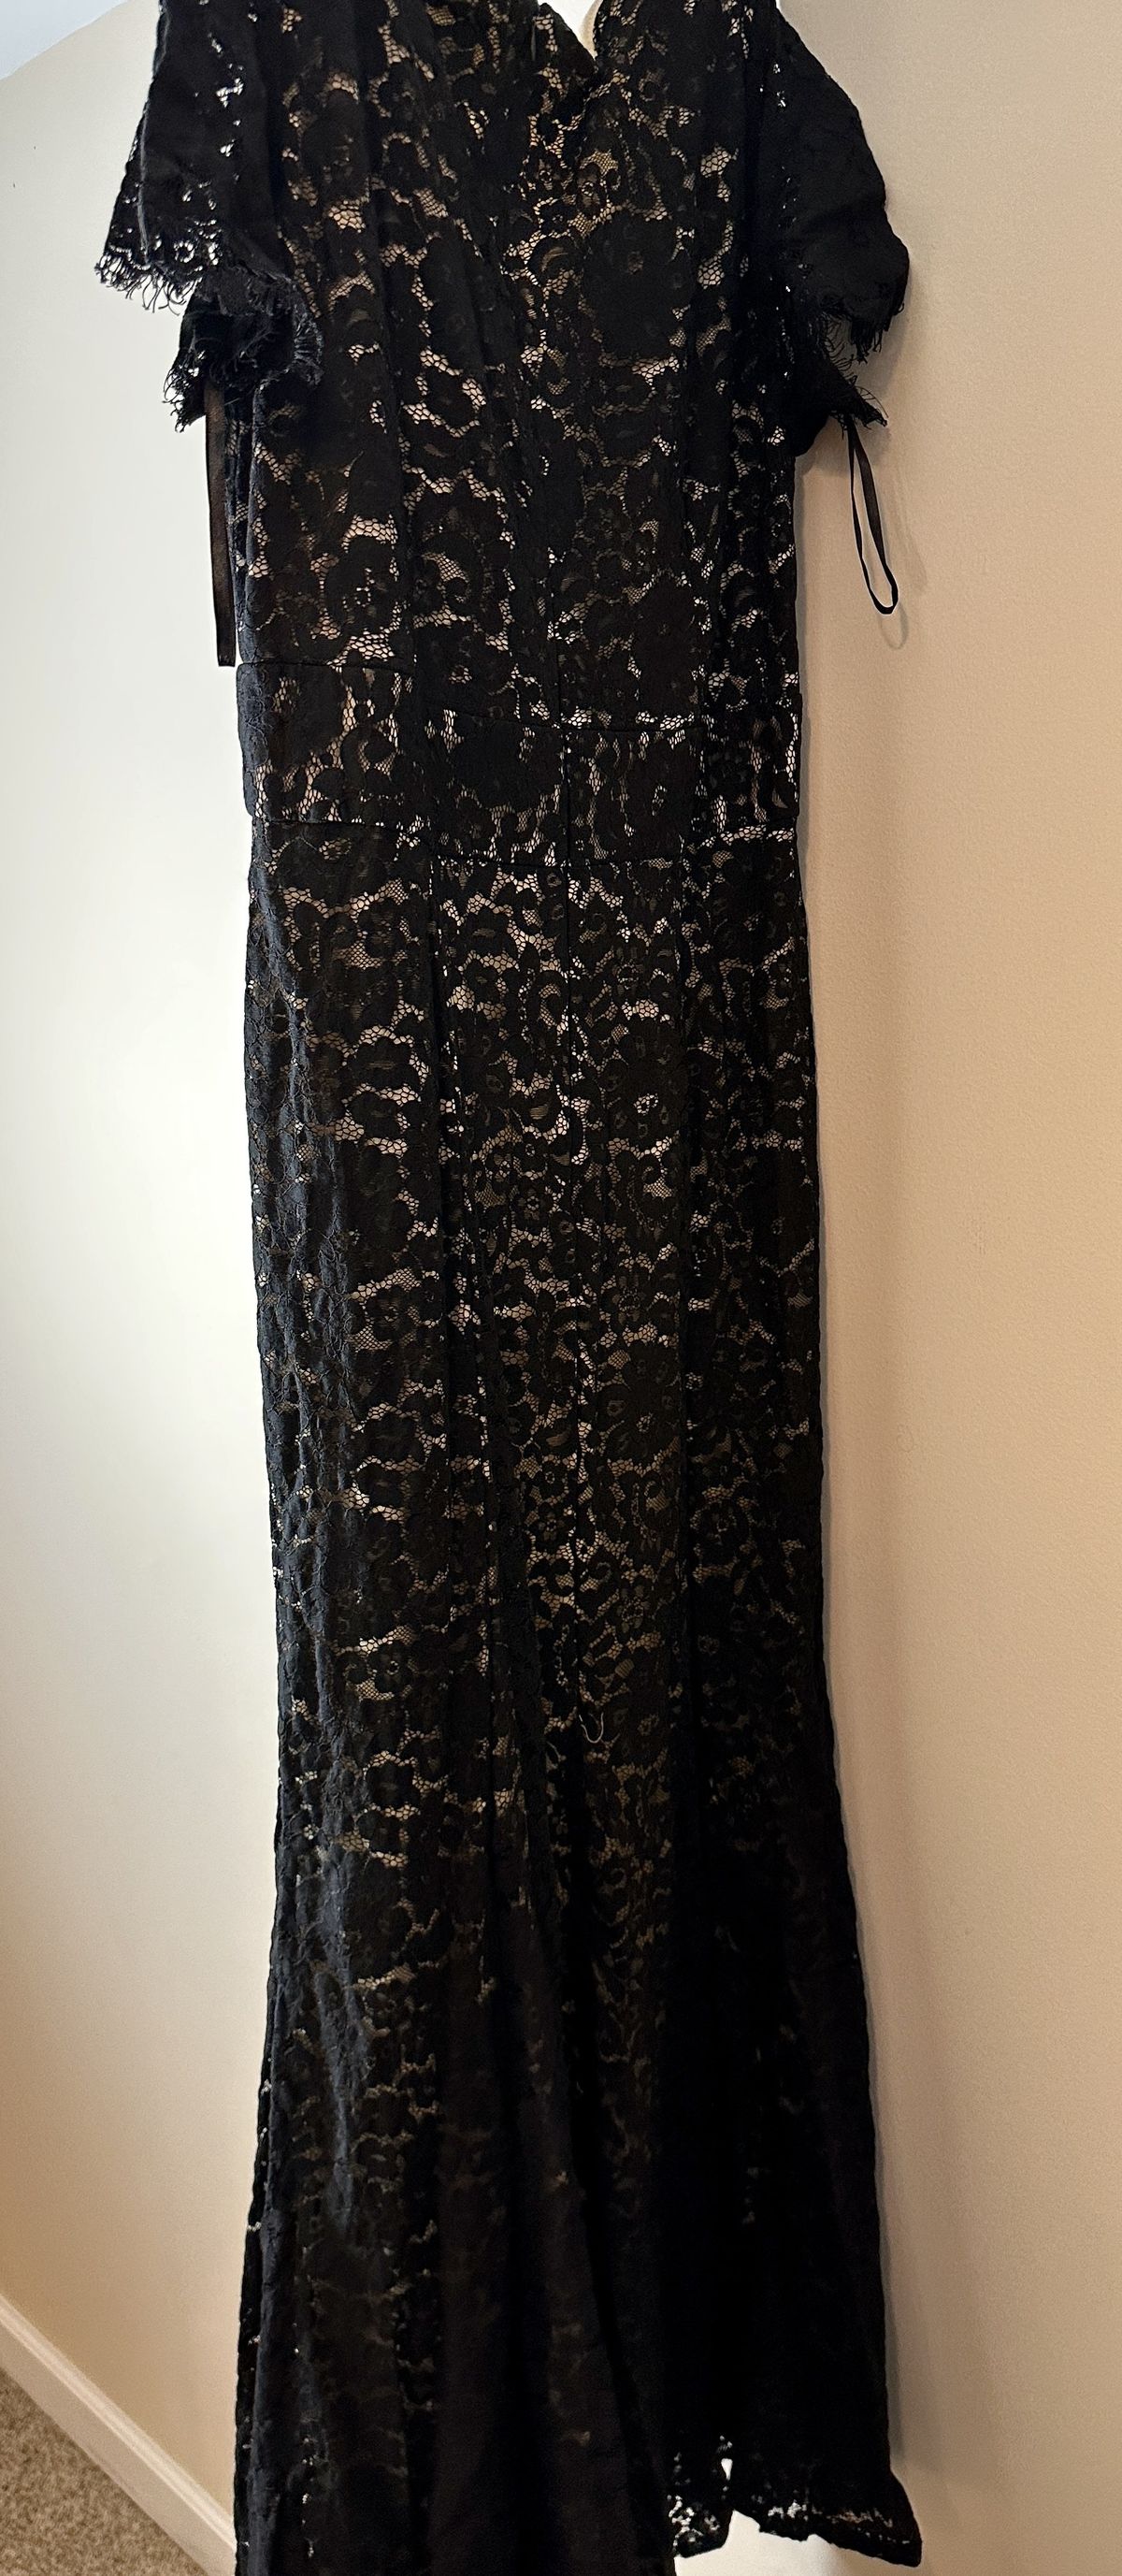 Plus Size 16 Lace Black Mermaid Dress on Queenly